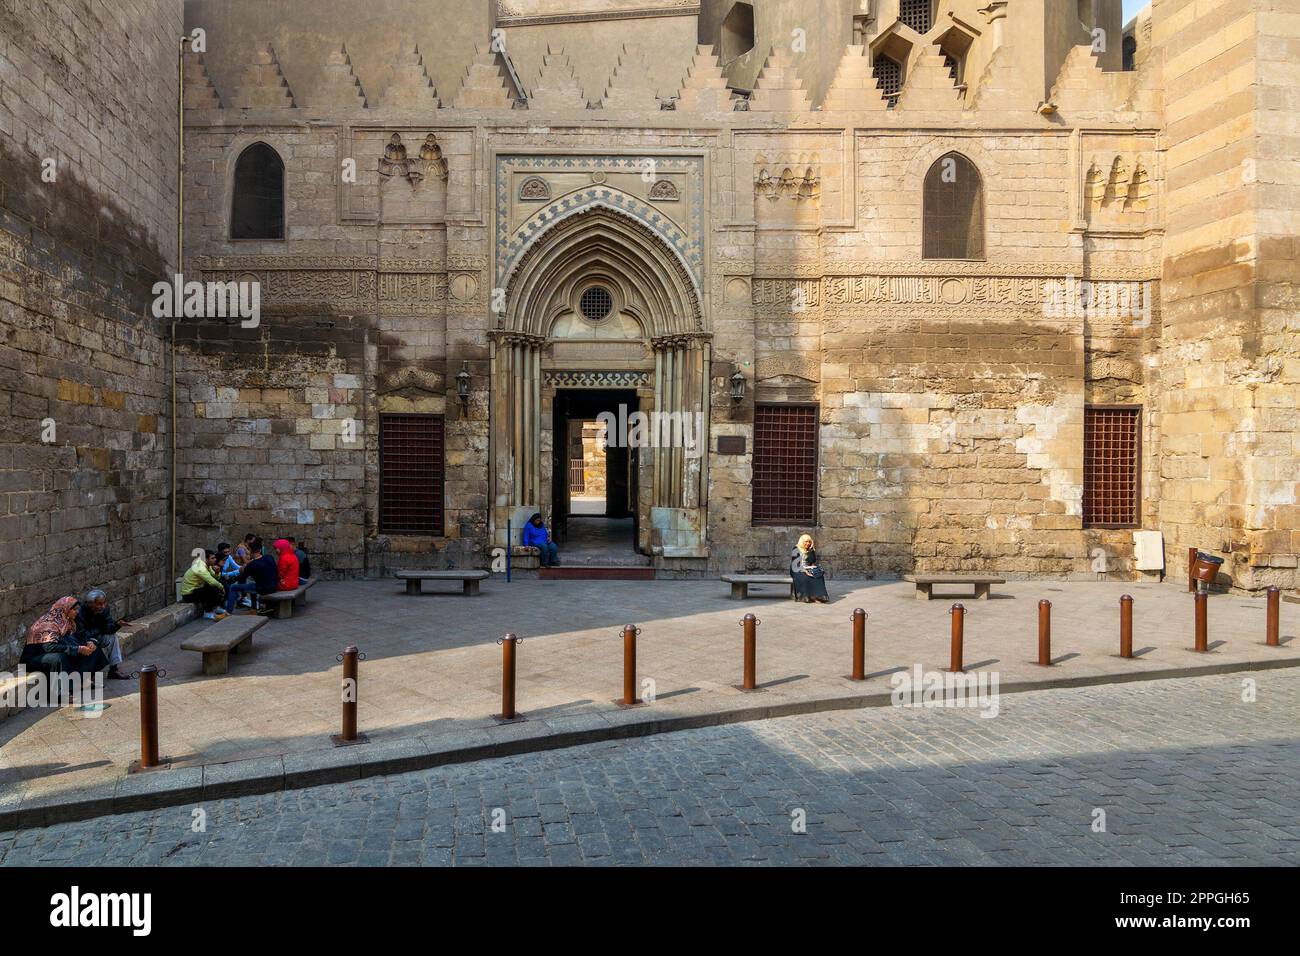 Entrance of theological school and Mausoleum of Sultan Qalawun, Cairo, Egypt Stock Photo